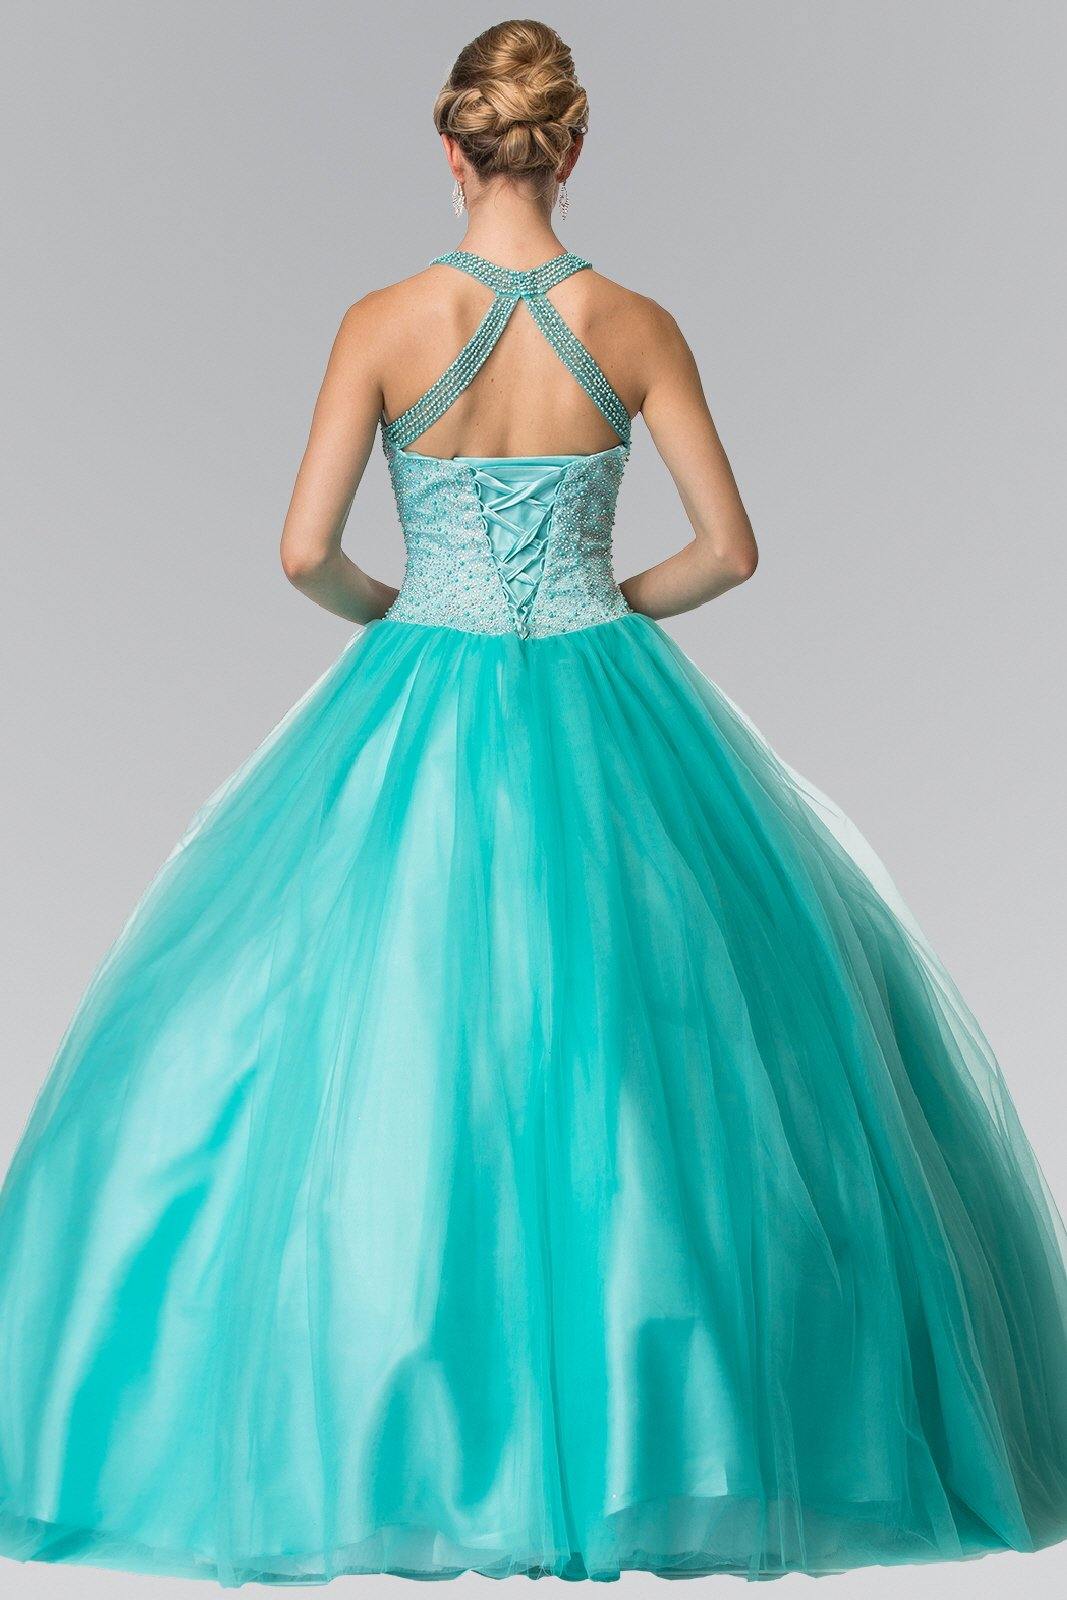 Illusion Sweathearted Tulle Quincenera Dress - The Dress Outlet Elizabeth K